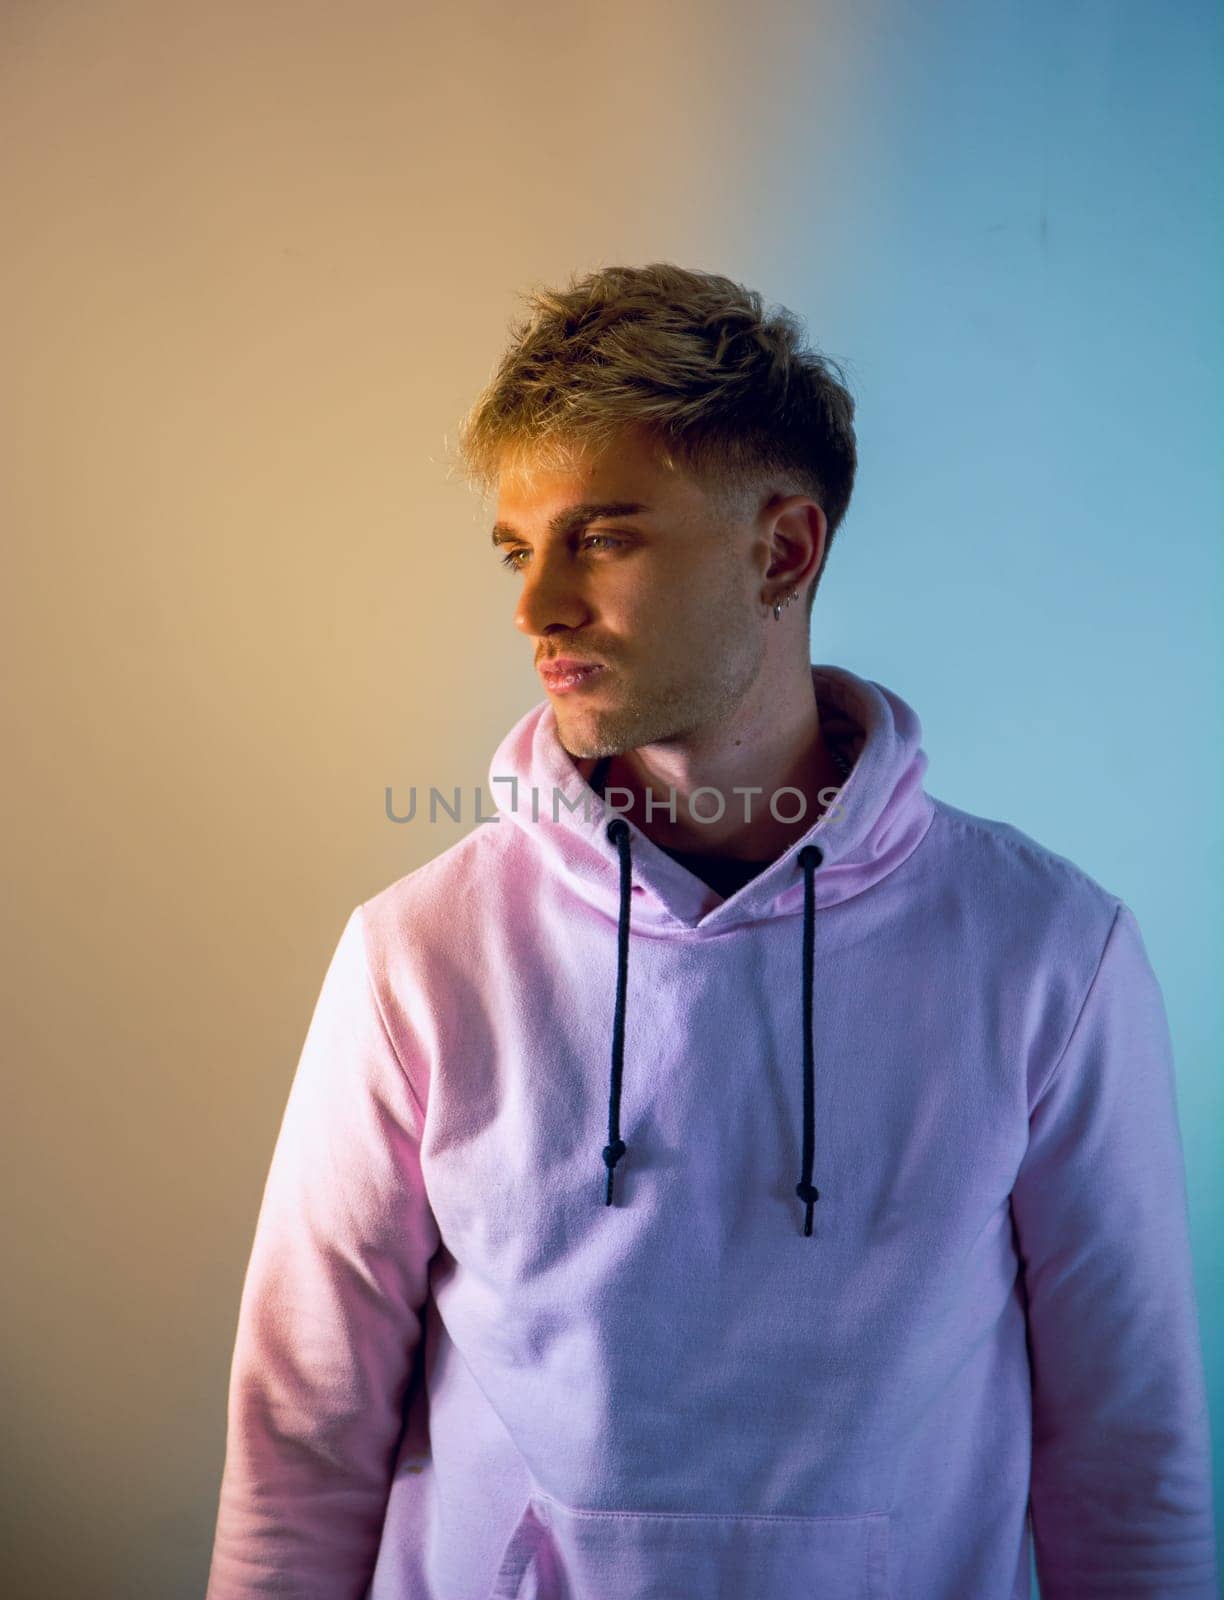 Attractive blond young man with blue eyes, wearing pink sweater, in studio shot on neutral background